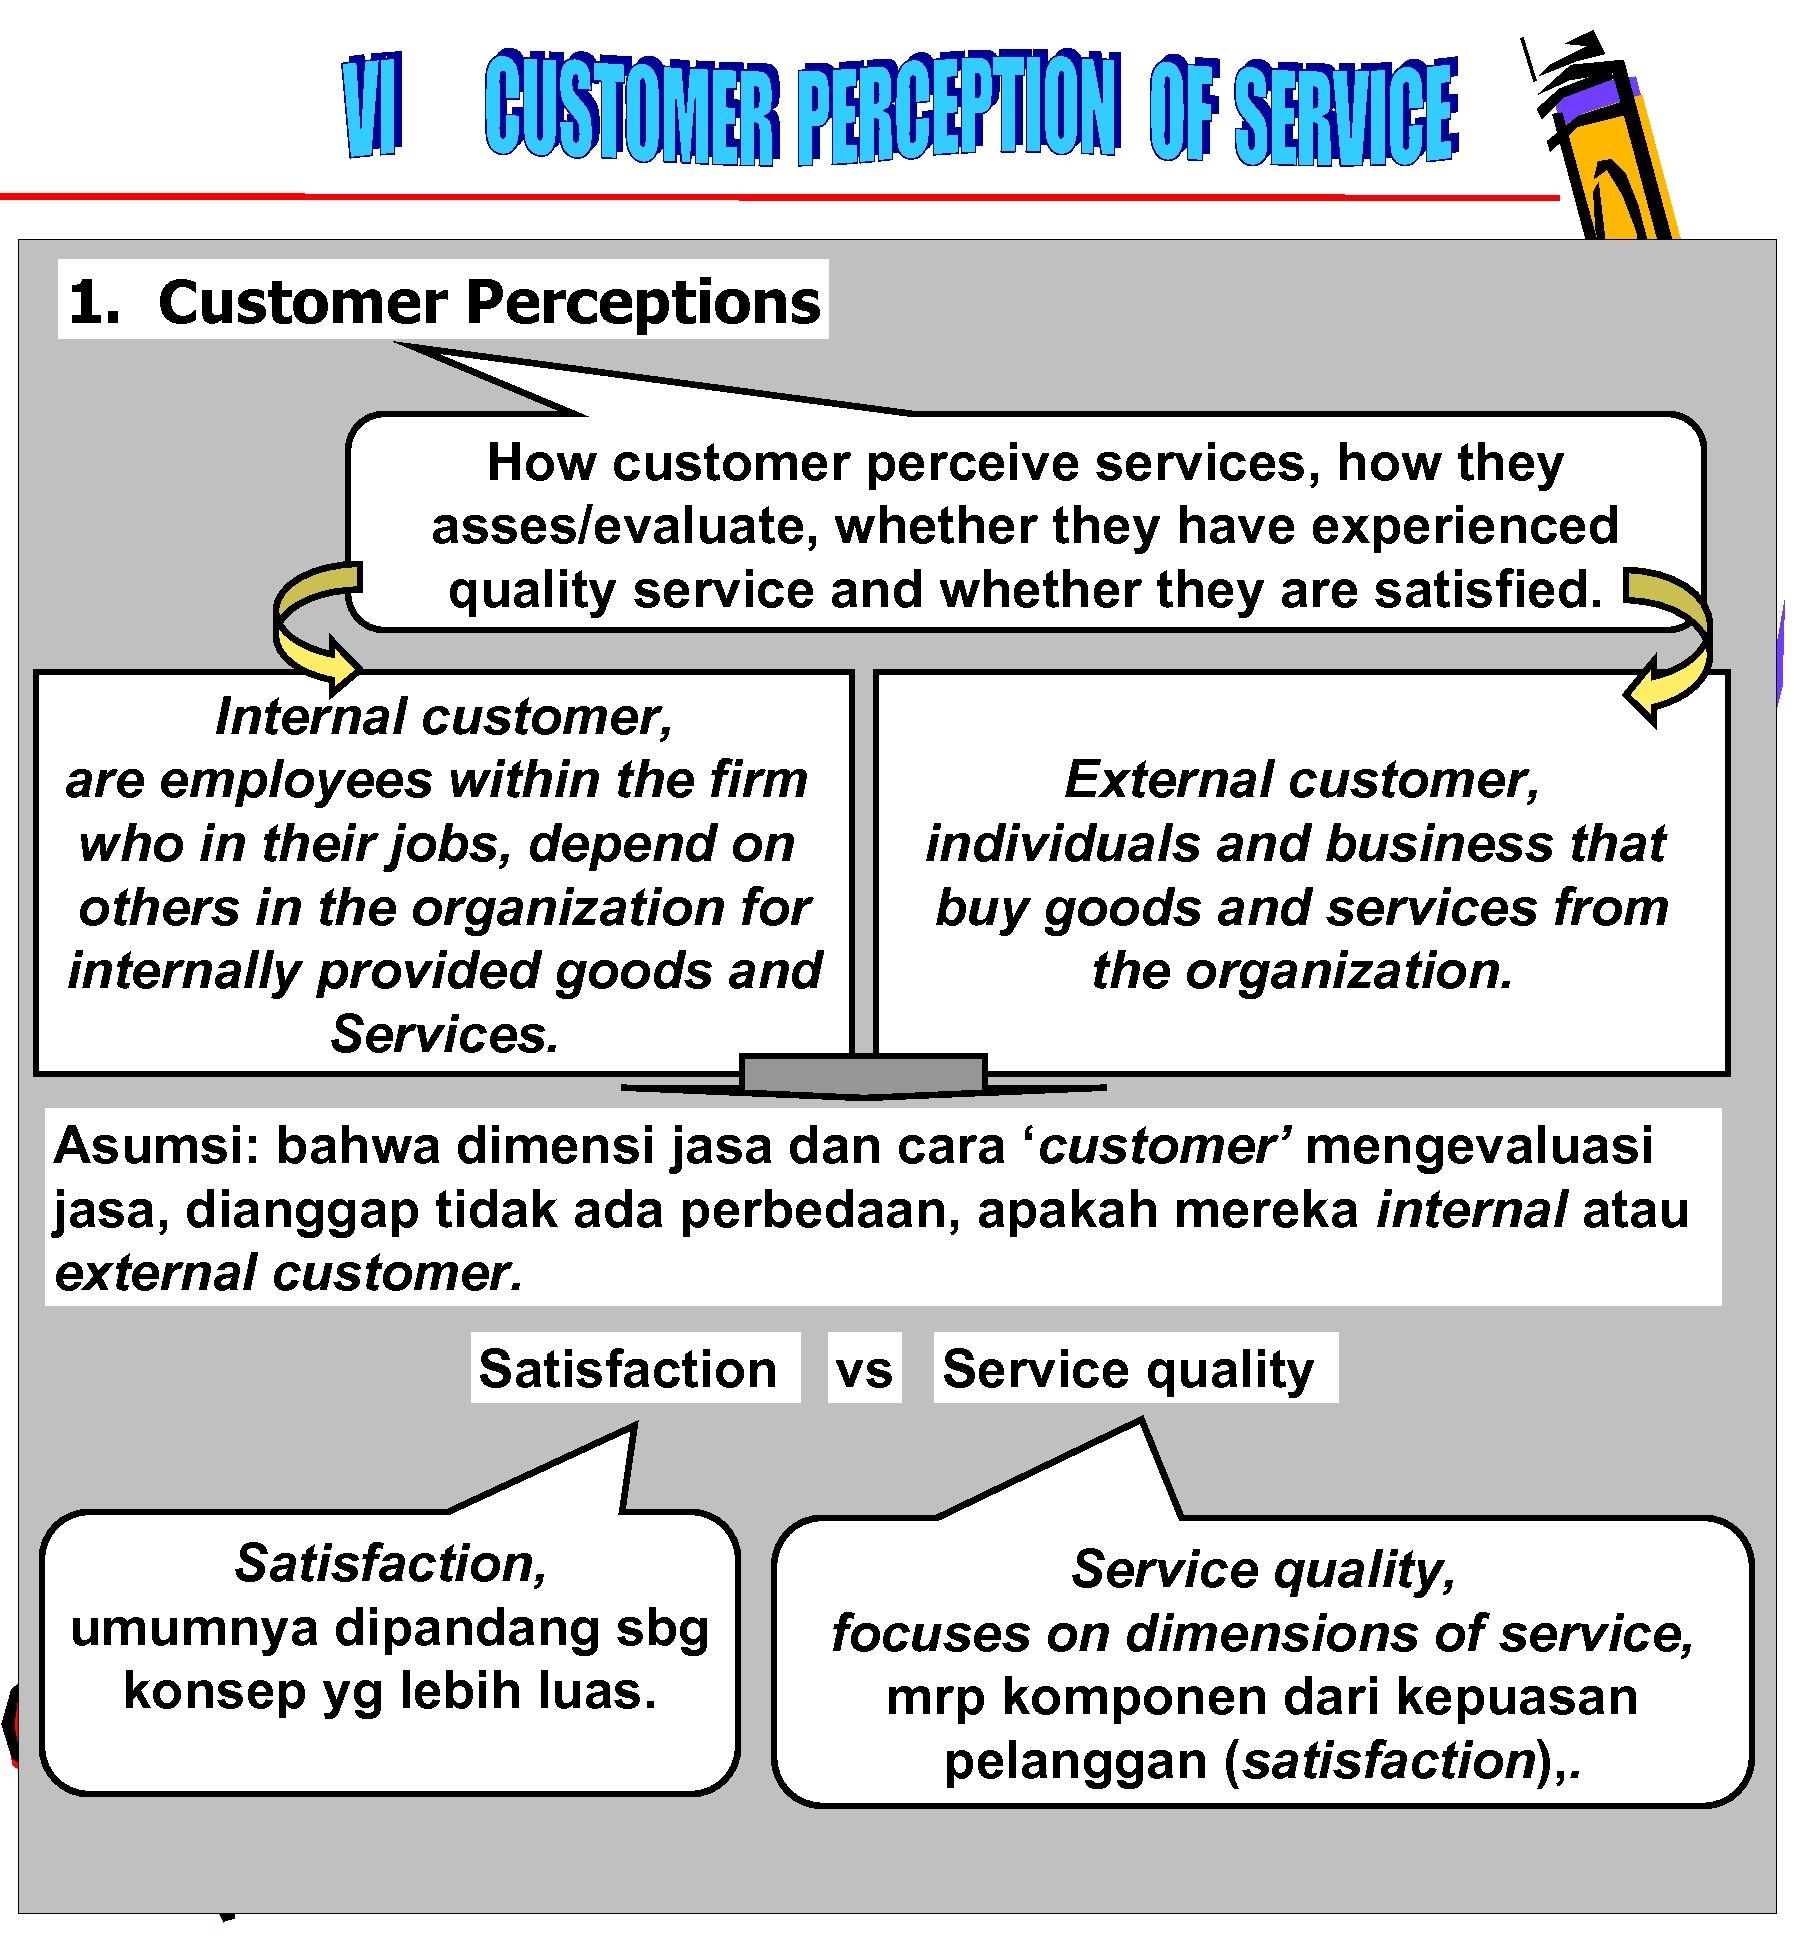 1. Customer Perceptions How customer perceive services, how they asses/evaluate, whether they have experienced